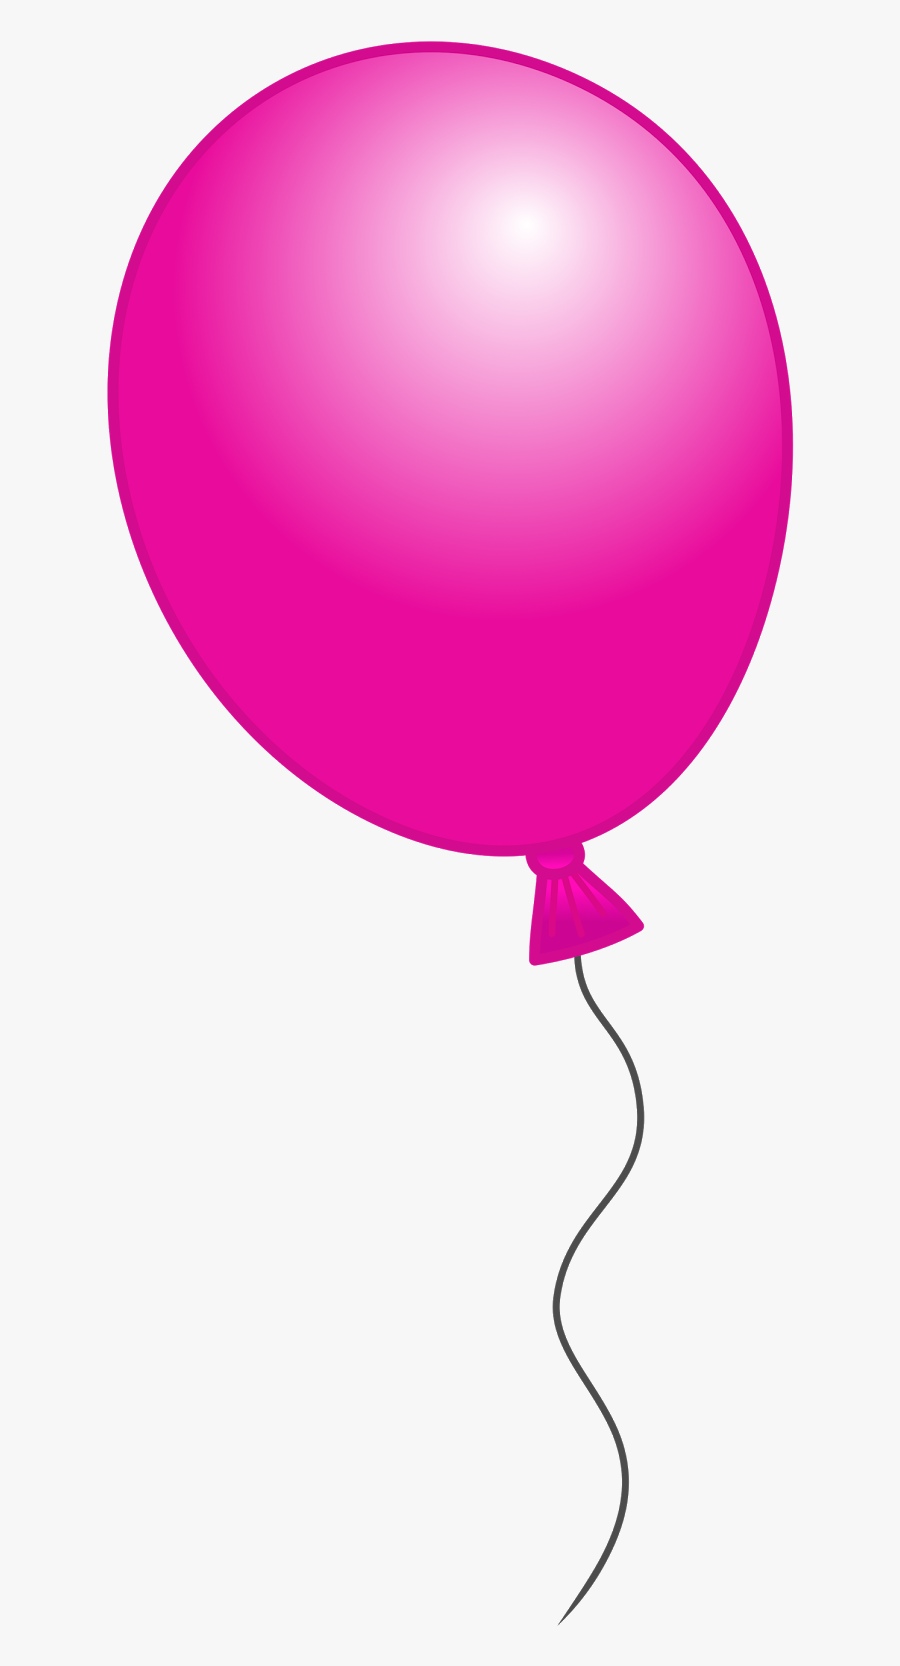 Pink Balloon Clipart - Pink Balloon Without Background, Transparent Clipart